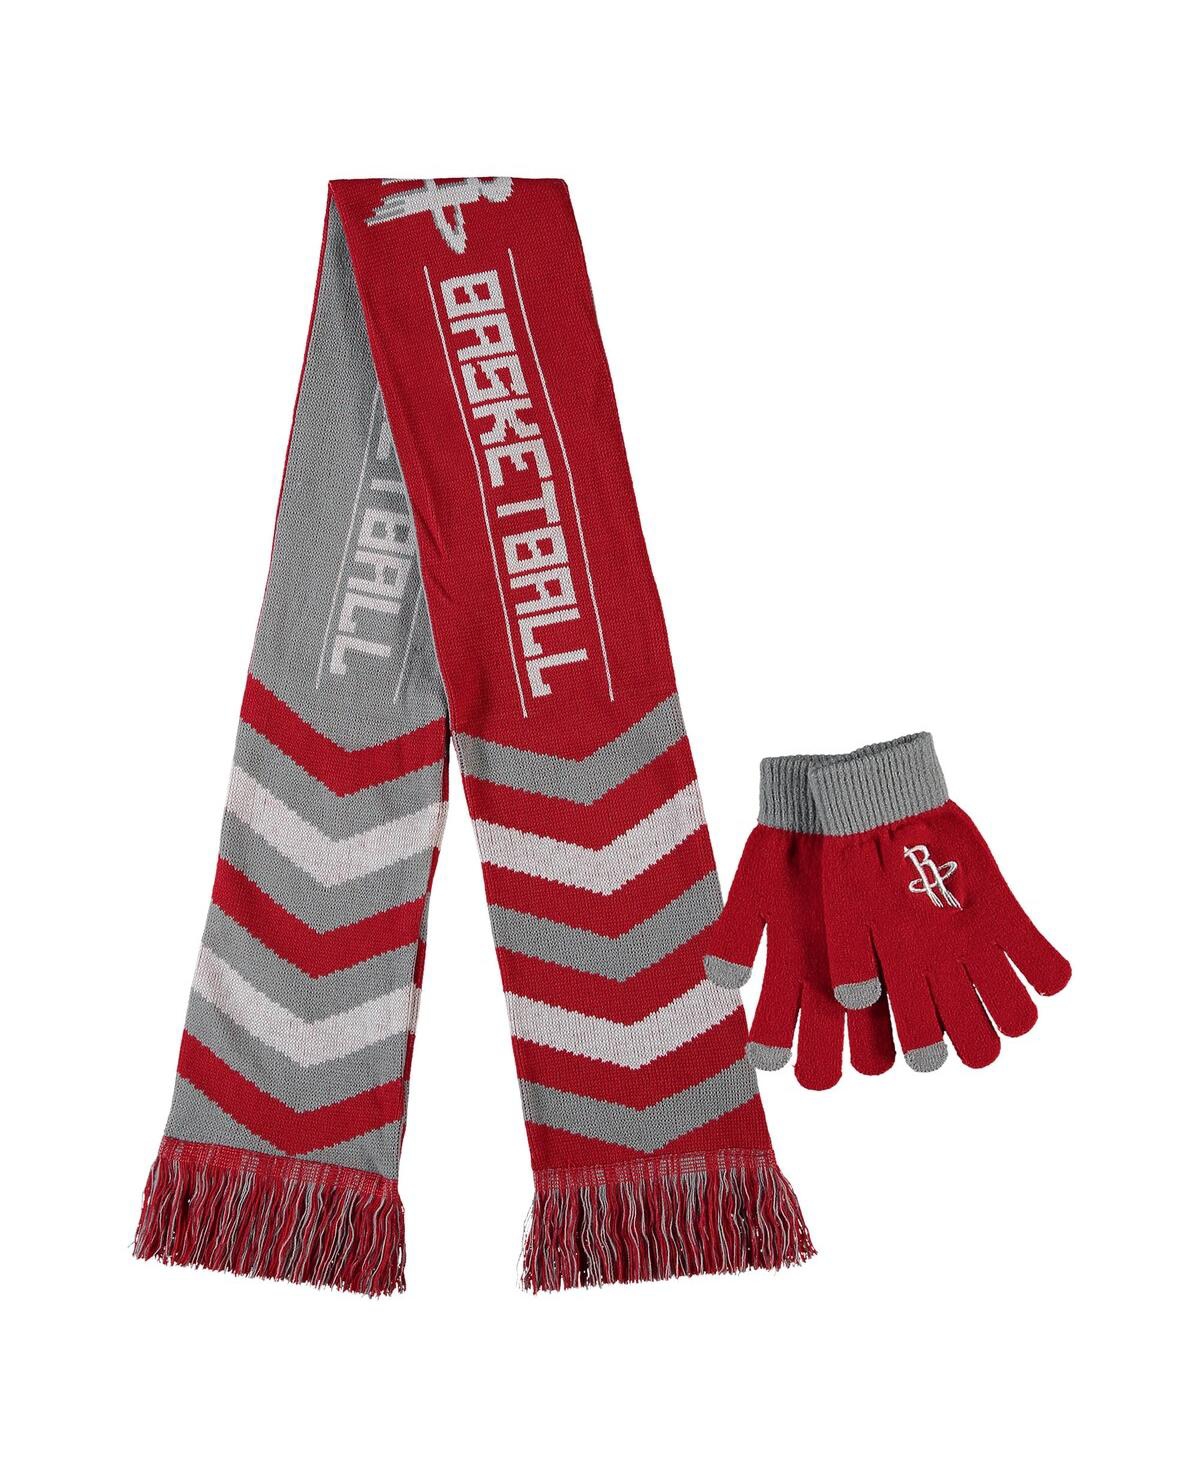 Men's and Women's Foco Red Houston Rockets Glove and Scarf Combo Set - Red